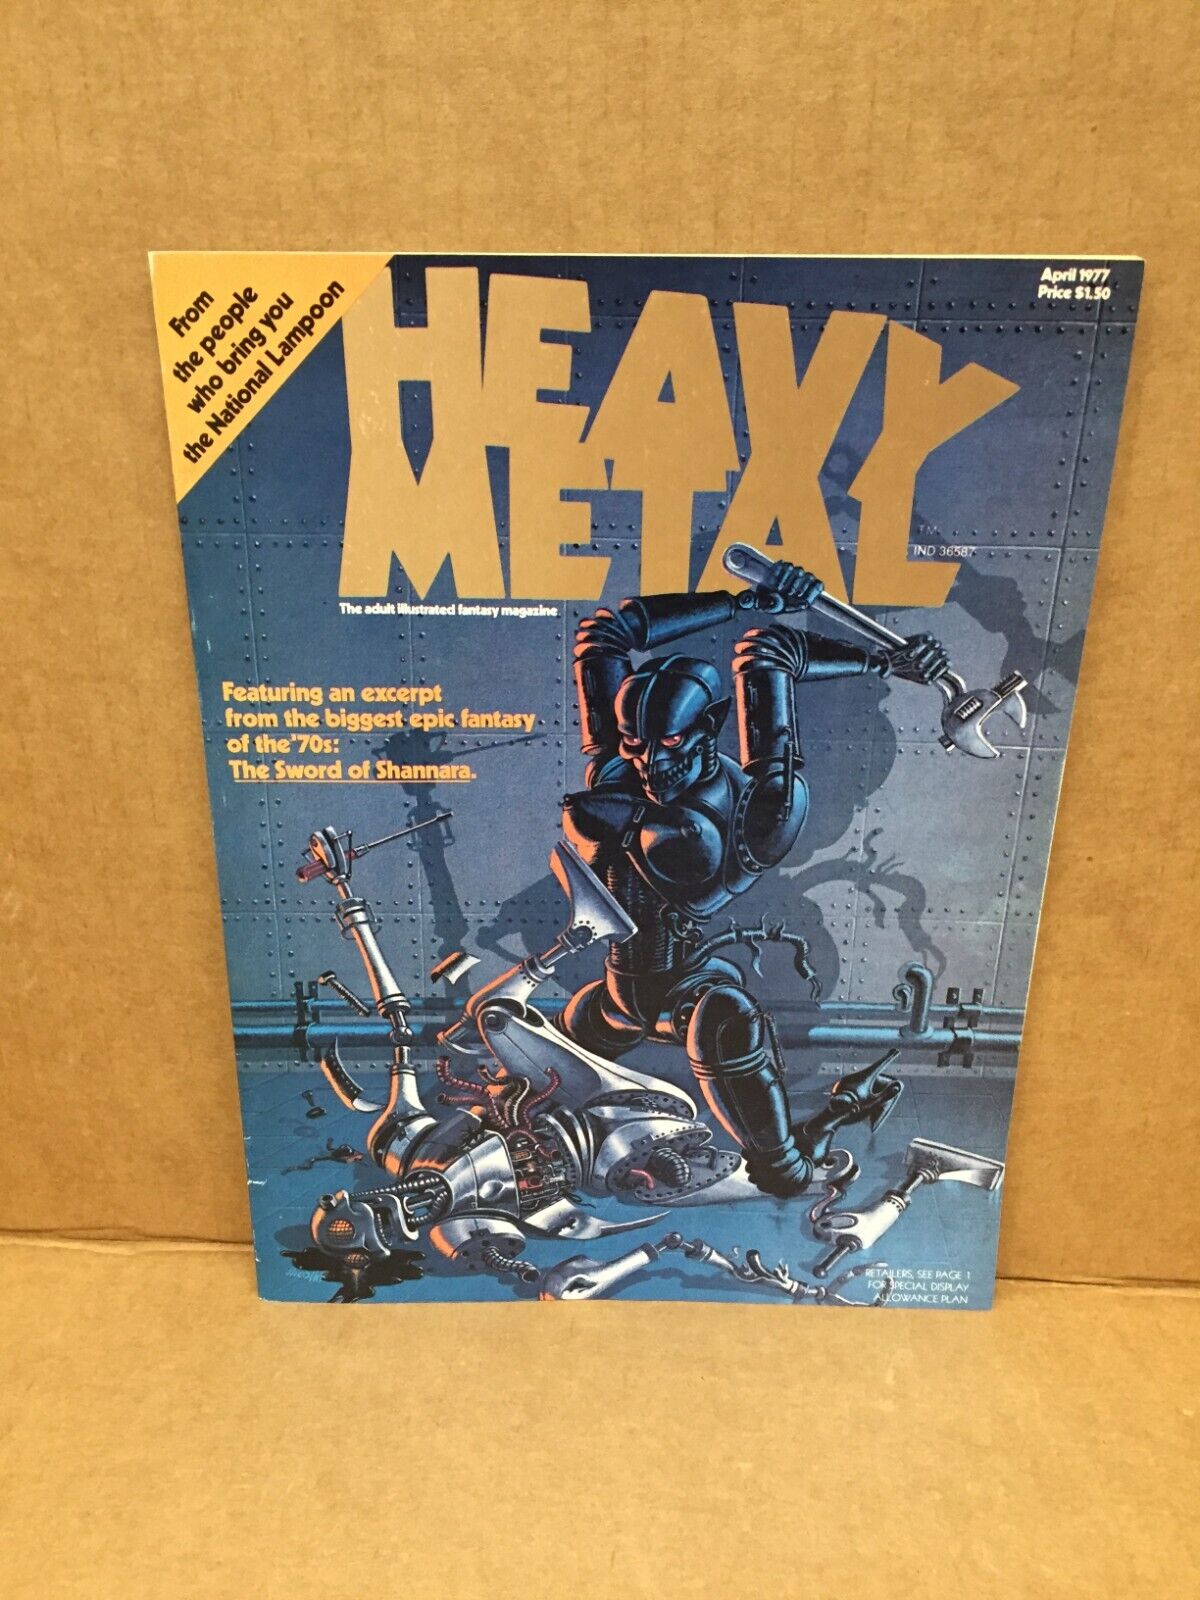 1977 HEAVY METAL MAGAZINE FIRST ISSUE VOL. 1 WITH SUBSCRIPTION CARD SUPER NICE